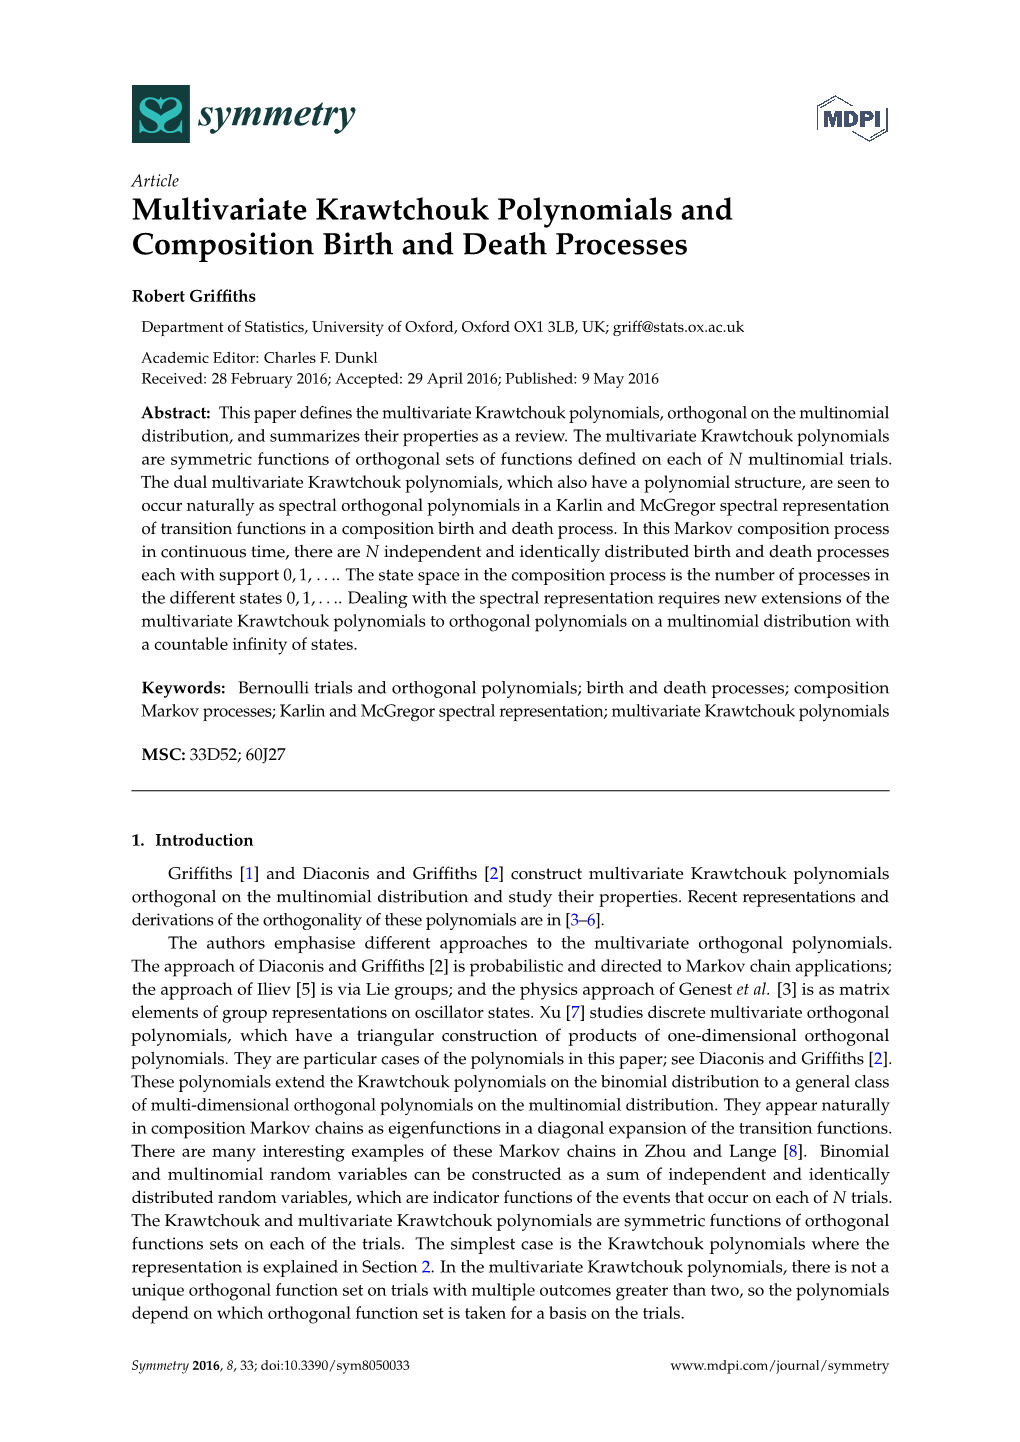 Multivariate Krawtchouk Polynomials and Composition Birth and Death Processes